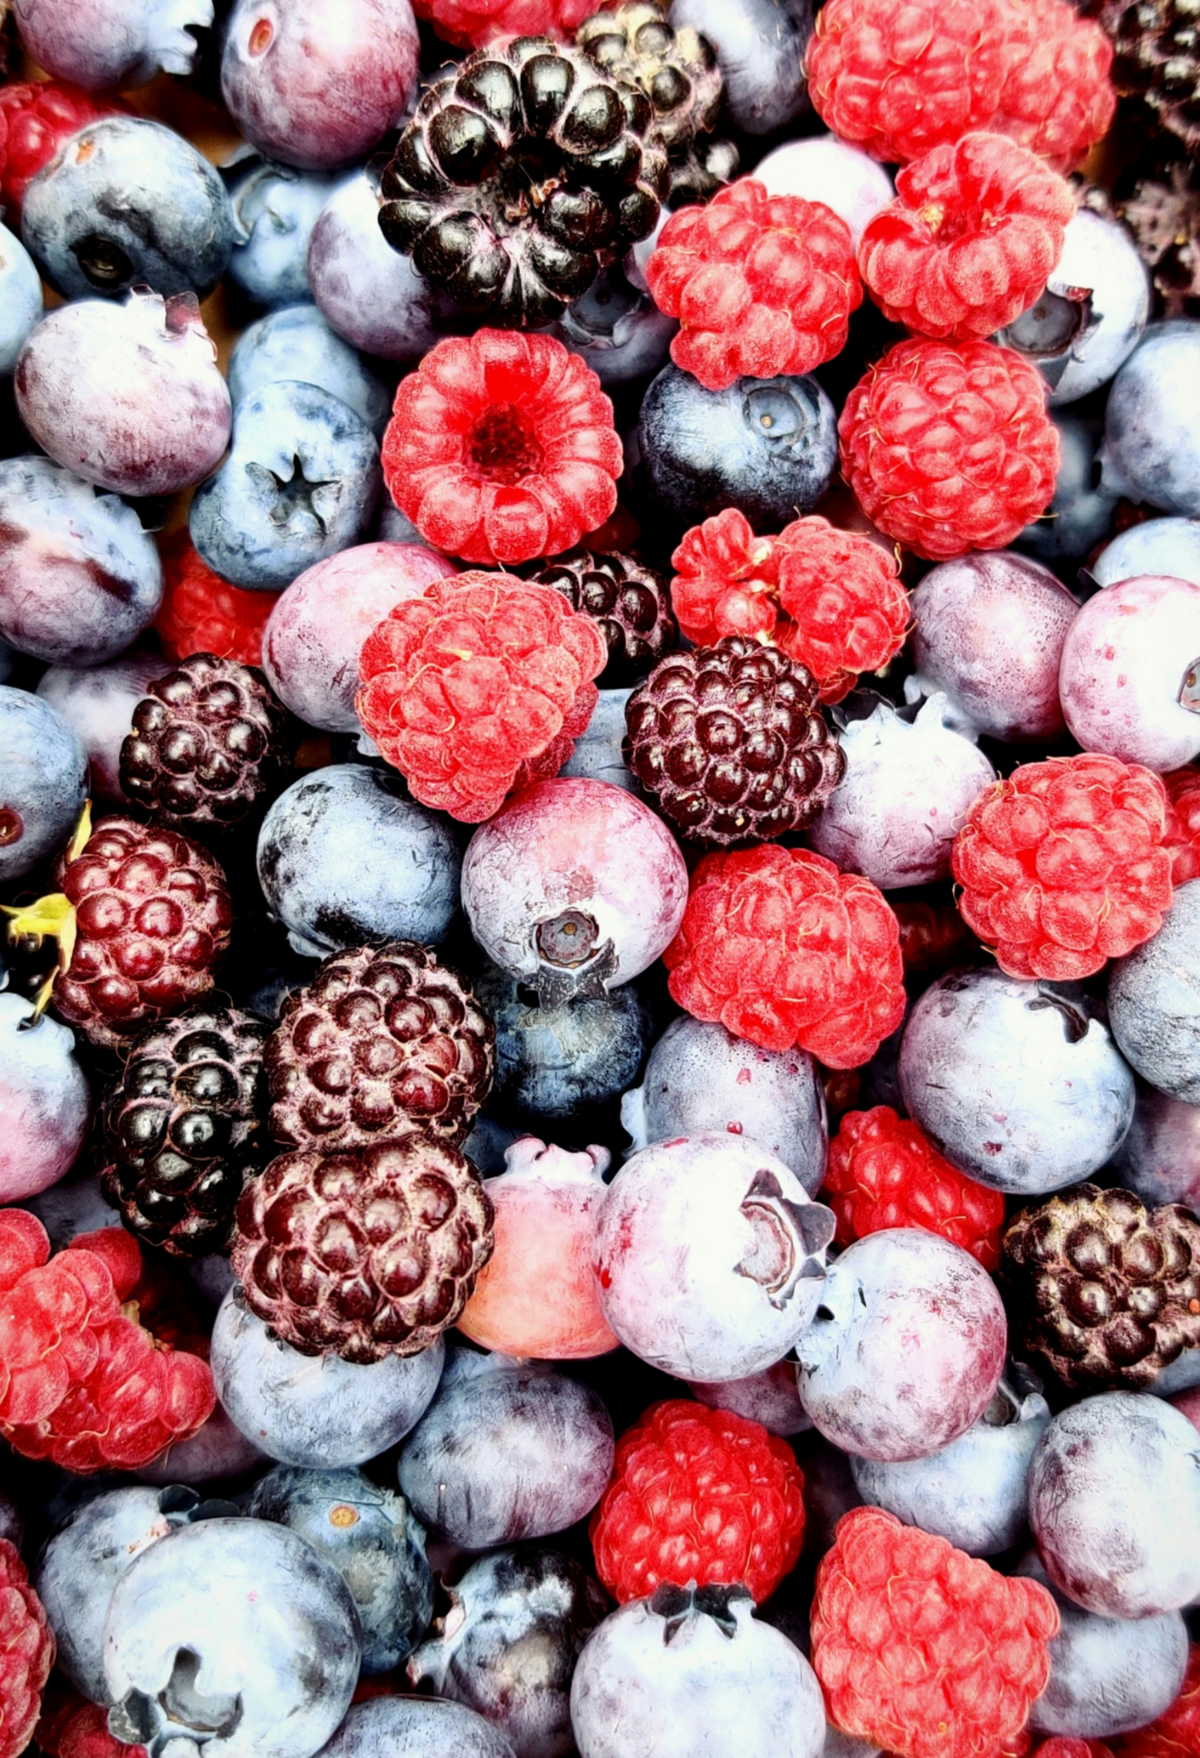 different types of berries